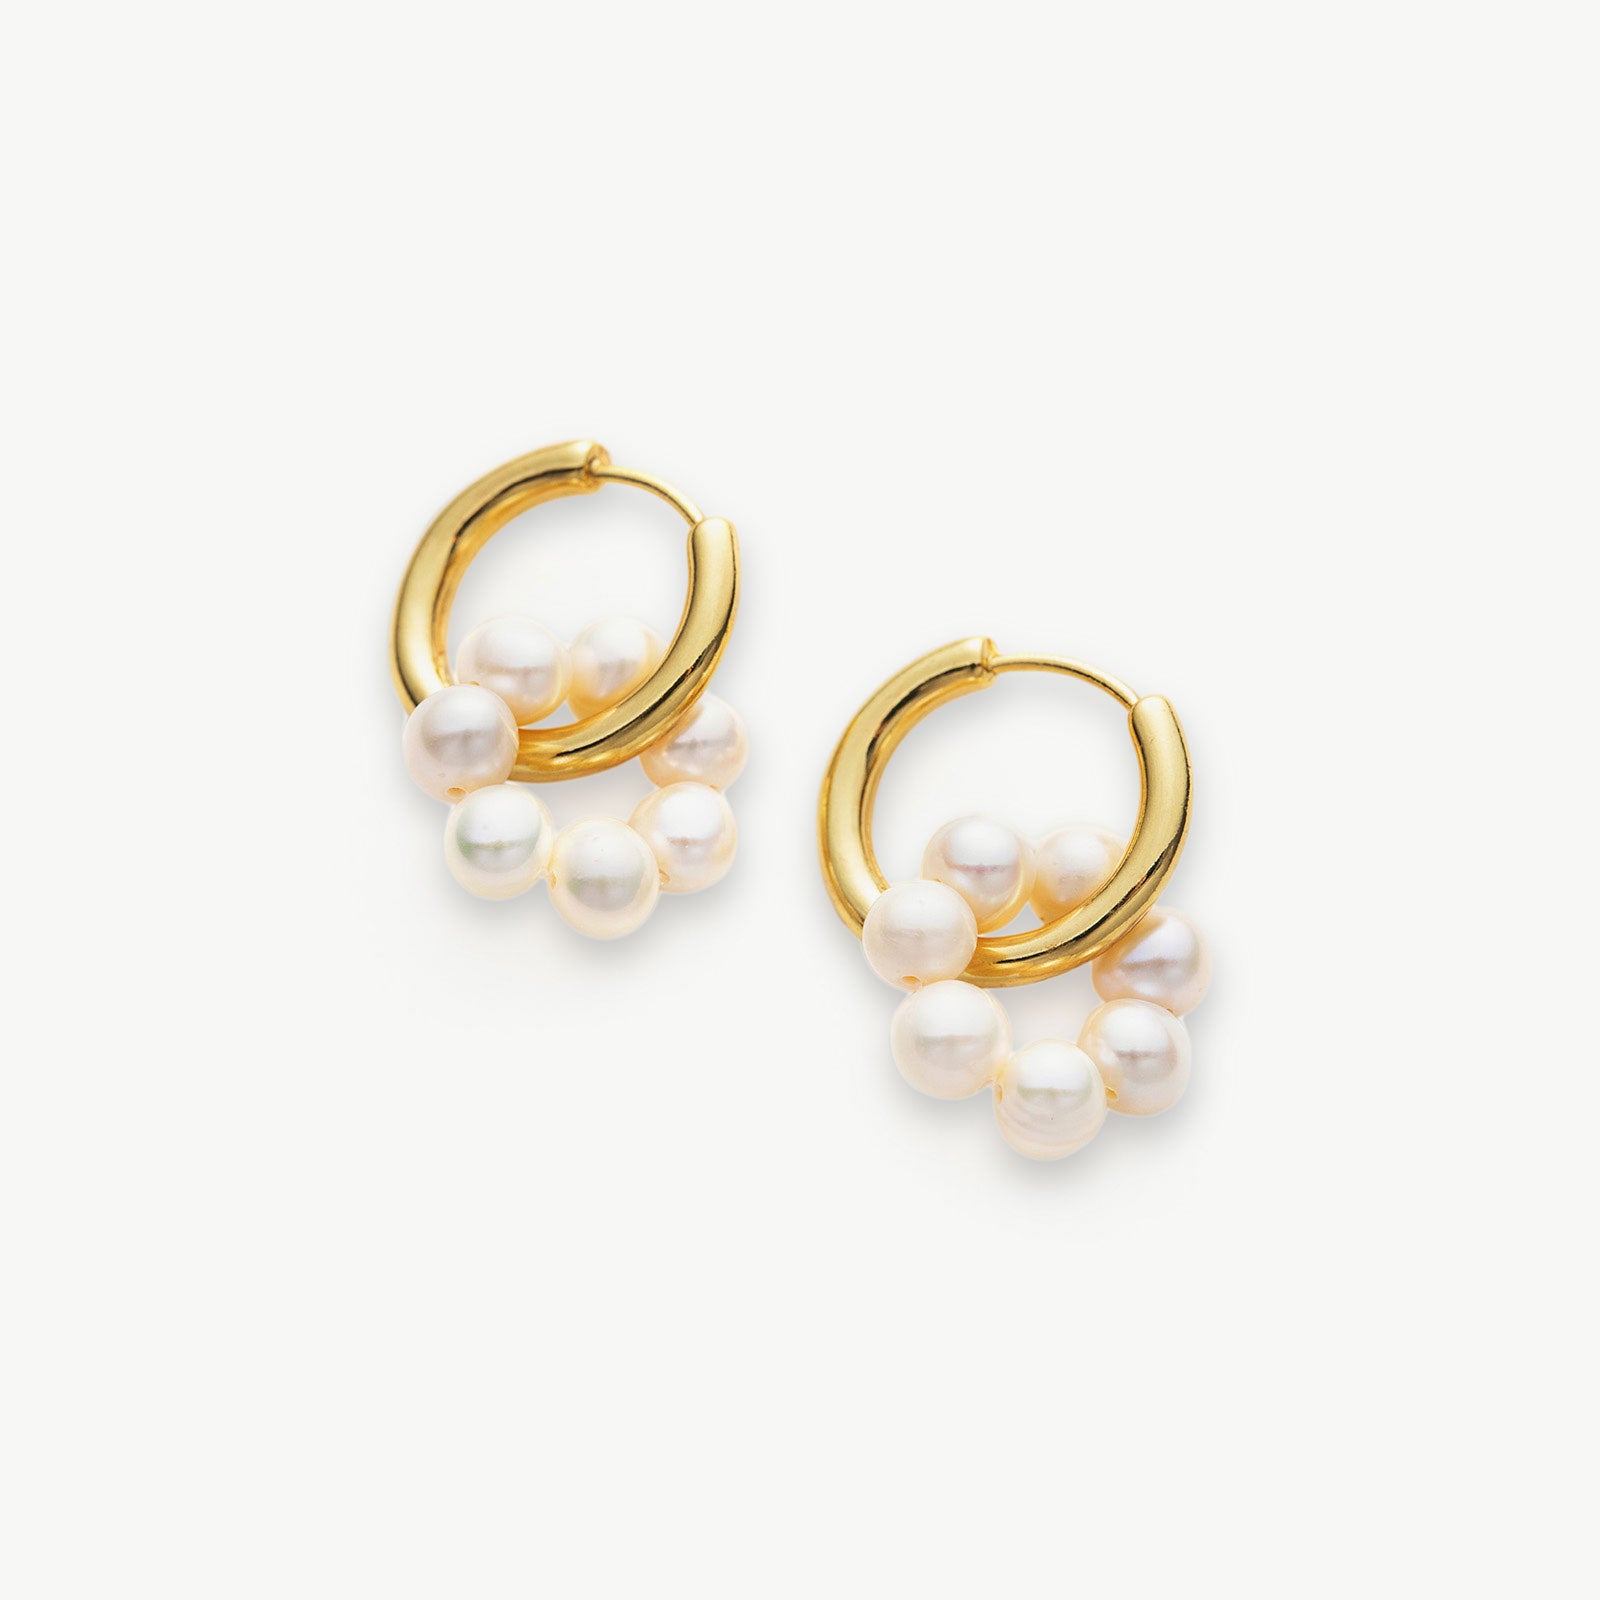 Tunnel Hoop Earrings adorned with delicate seed pearls, an elegant and timeless accessory that adds a touch of sophistication to your ensemble